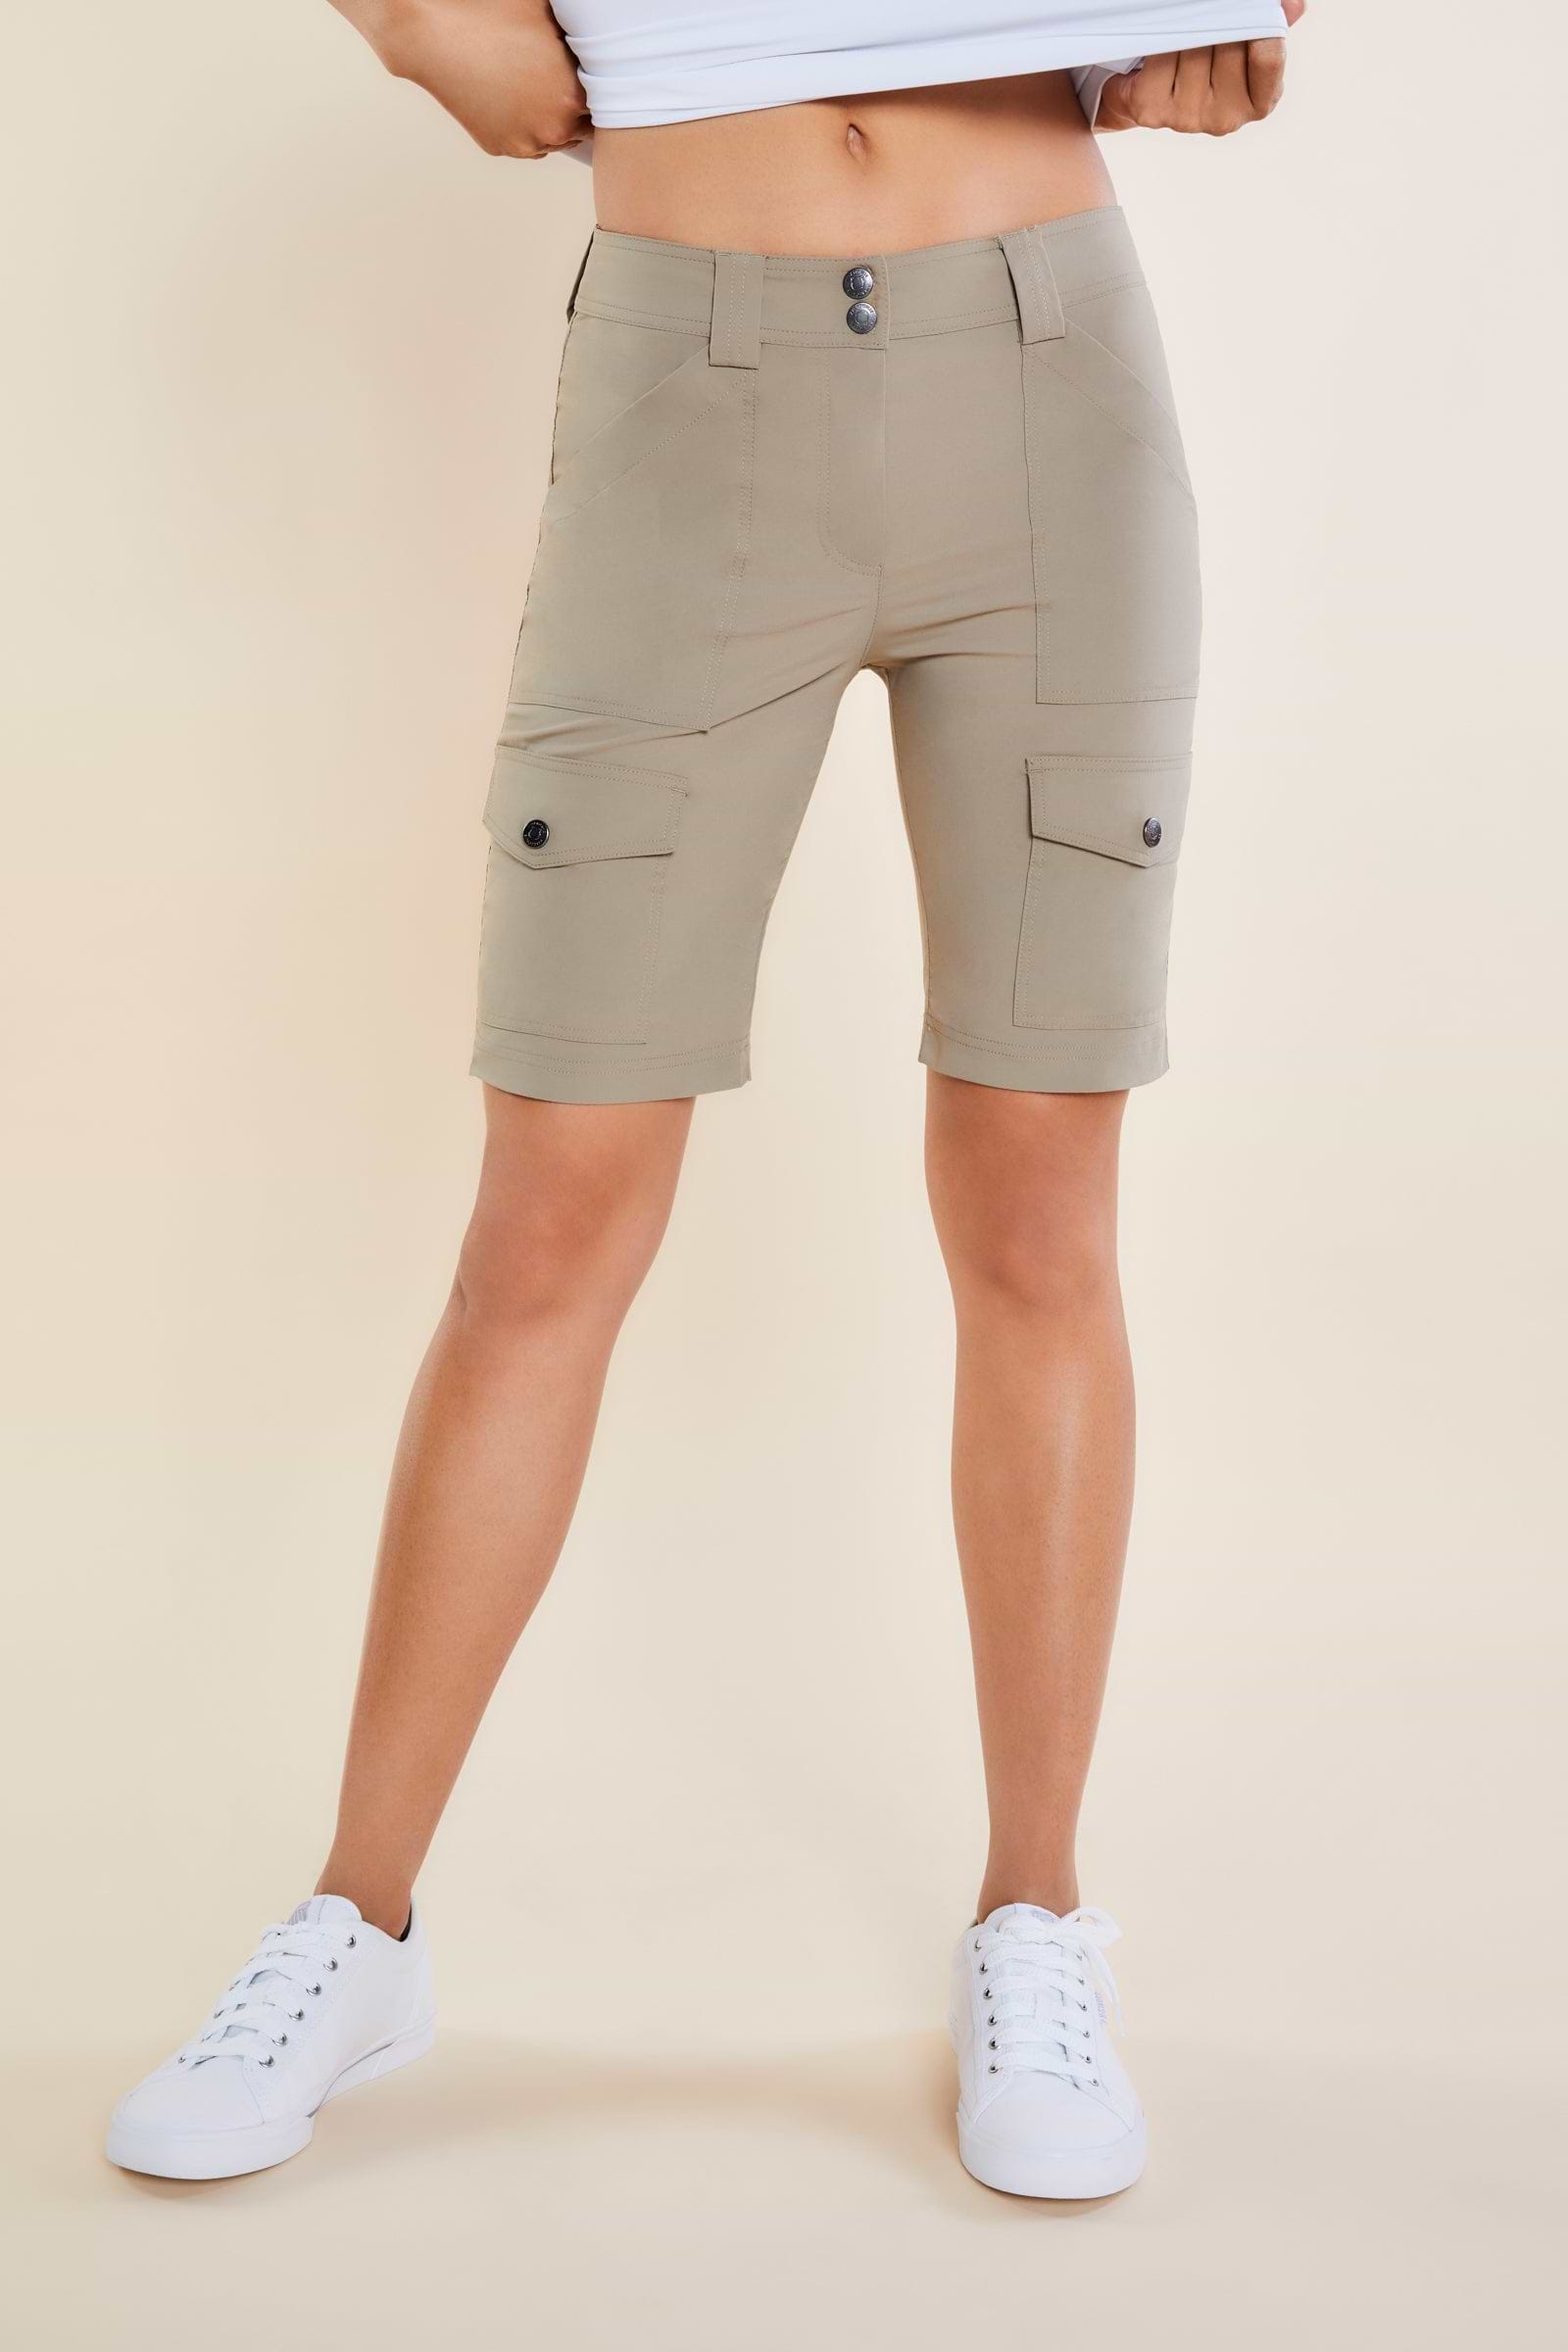 The Best Travel Shorts. Woman Showing the Front Profile of an Apiedi Shorts in Khaki.